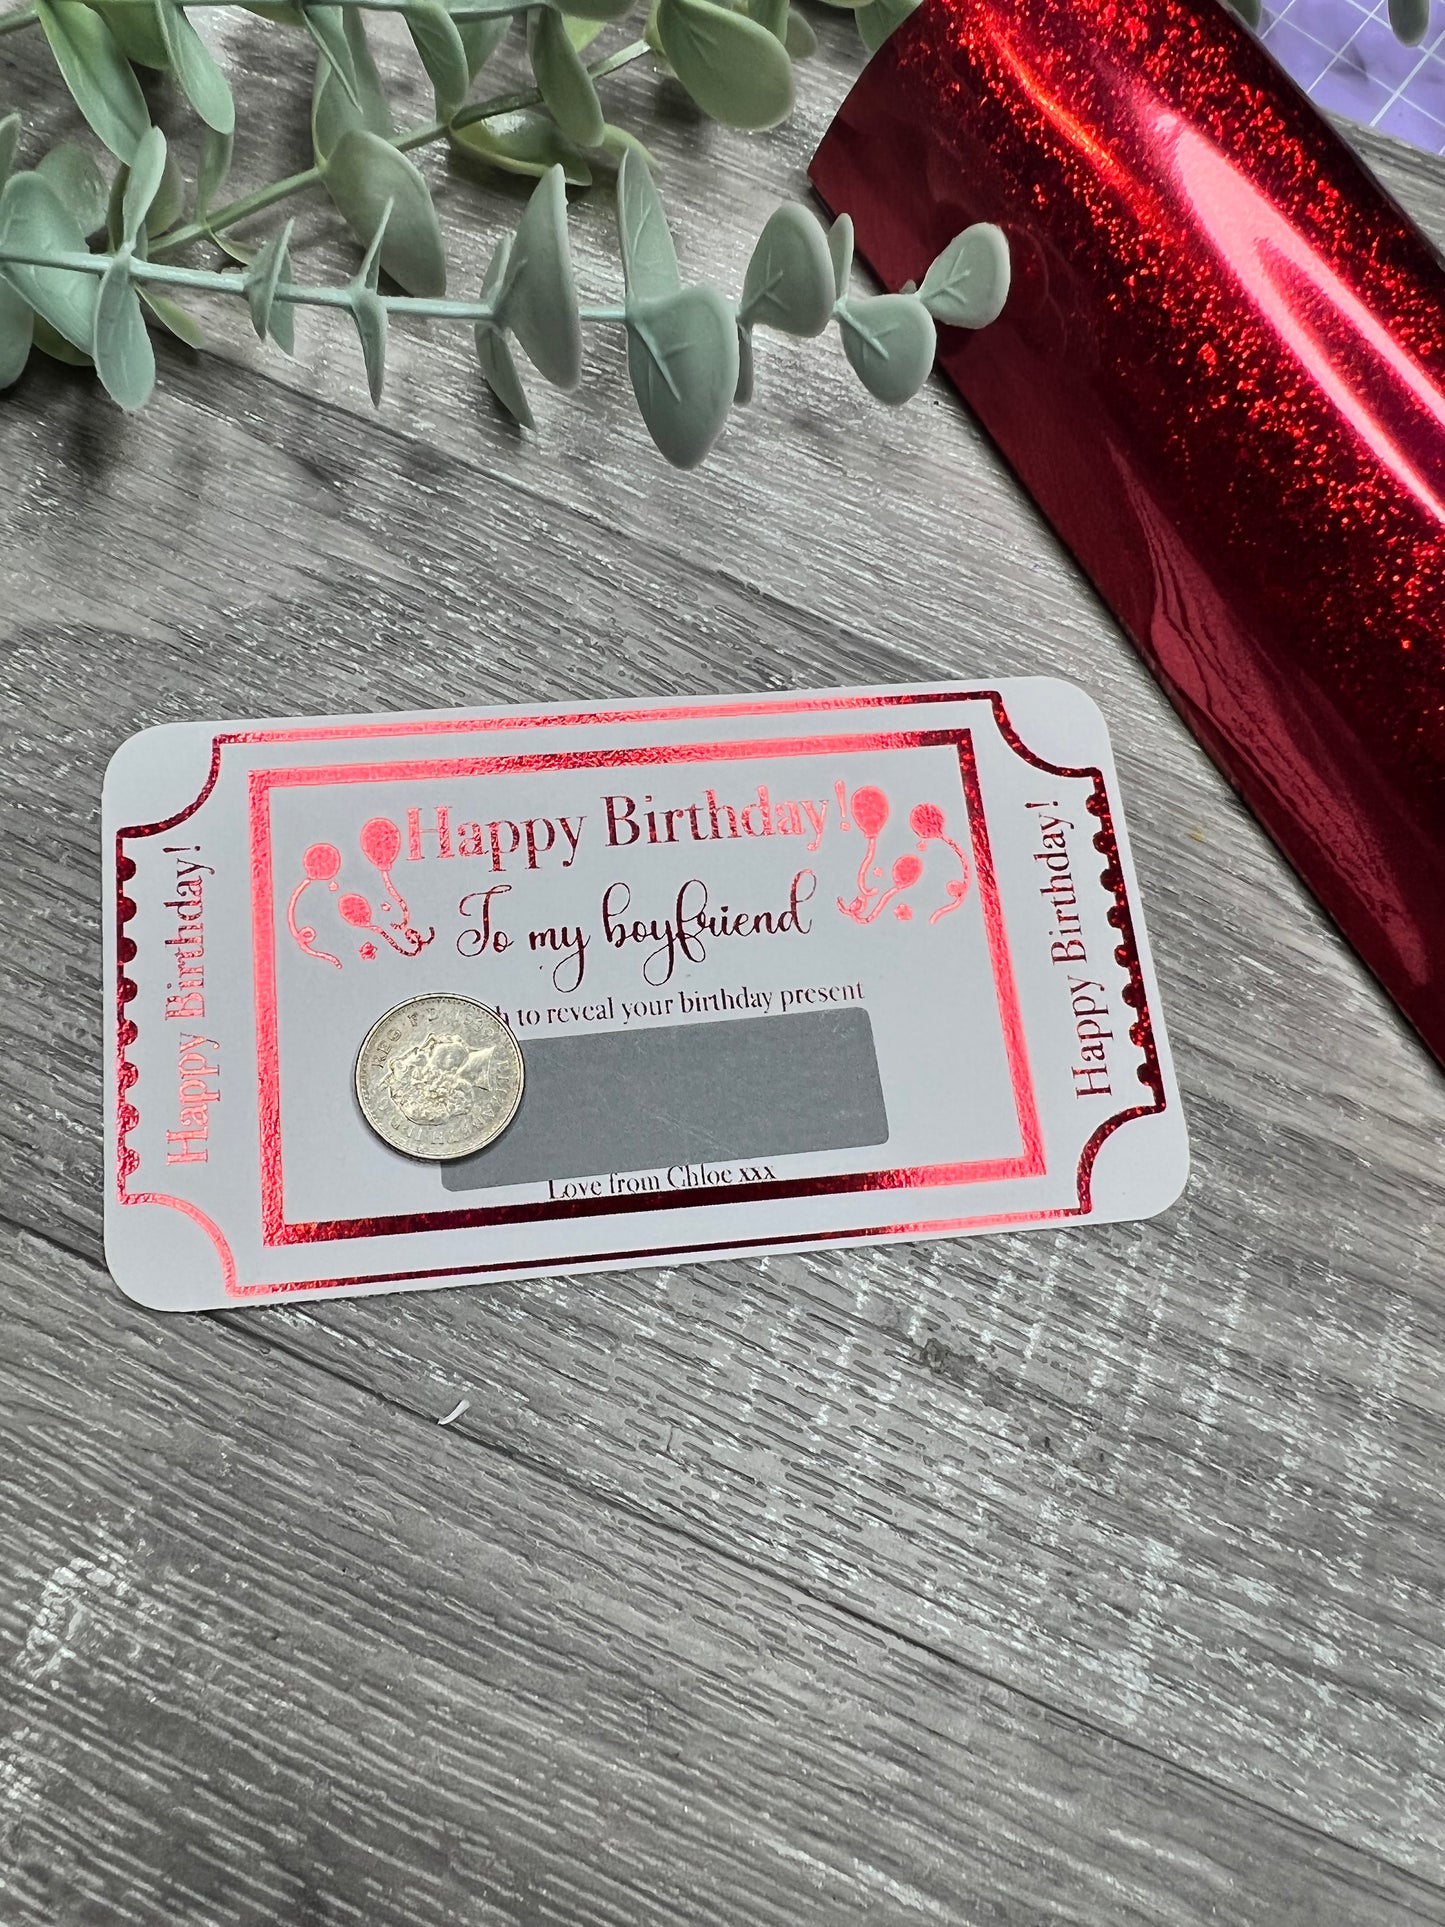 Personalised Birthday scratch card